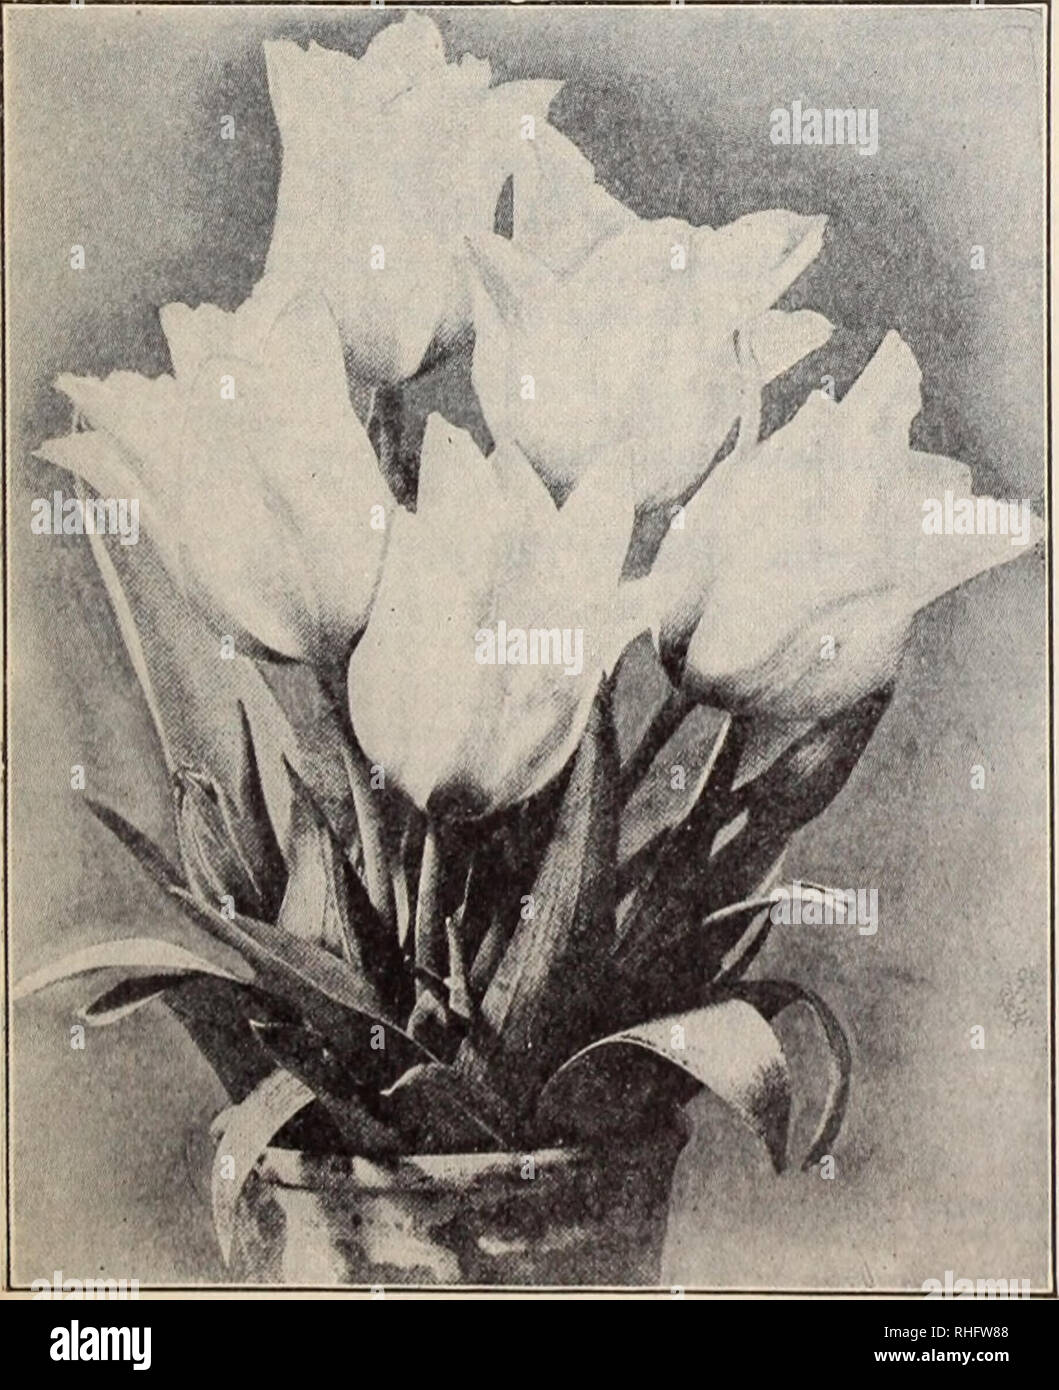 . Boddington's quality bulbs, seeds and plants / Arthur T. Boddington.. Nursery Catalogue. Single Tulip, Cardinal's Hat Doz. 100 I,coo $0 40 $2 50 $20 00 35 2 00 15 00. Single Pink and Rose Tulips t&quot;Couleur Ponceau. Rich cerise ; very fine 20 t*Cottage Maid. Rosy pink, white striped ; ex- ct-llent forcer 25 t Proserpine. Large and handsome ; rich silky roe-e ; early forcer 5° I Rose Grisdelin. Delicate pink, tinged white; good forcer ; very fine 35 Rose Luisante. Deep pink; a high-class showy variety 50 1 ' Rosamuudi Huikman. Bright pink, feath- ered white; very large flowers 25 IPink Bea Stock Photo